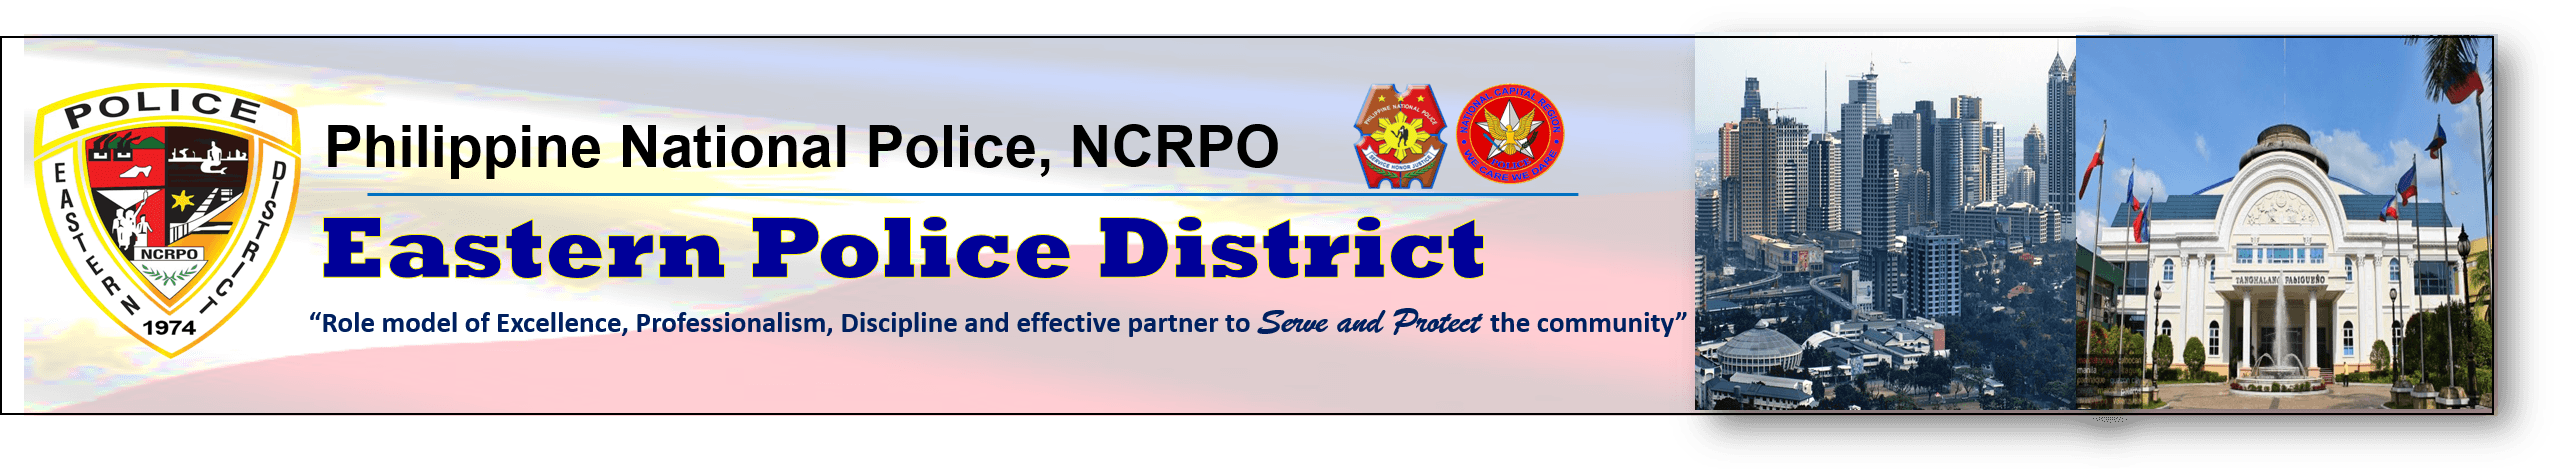 NCRPO Logo - Information and Advice | Welcome: Eastern Police District, PNP-NCRPO ...